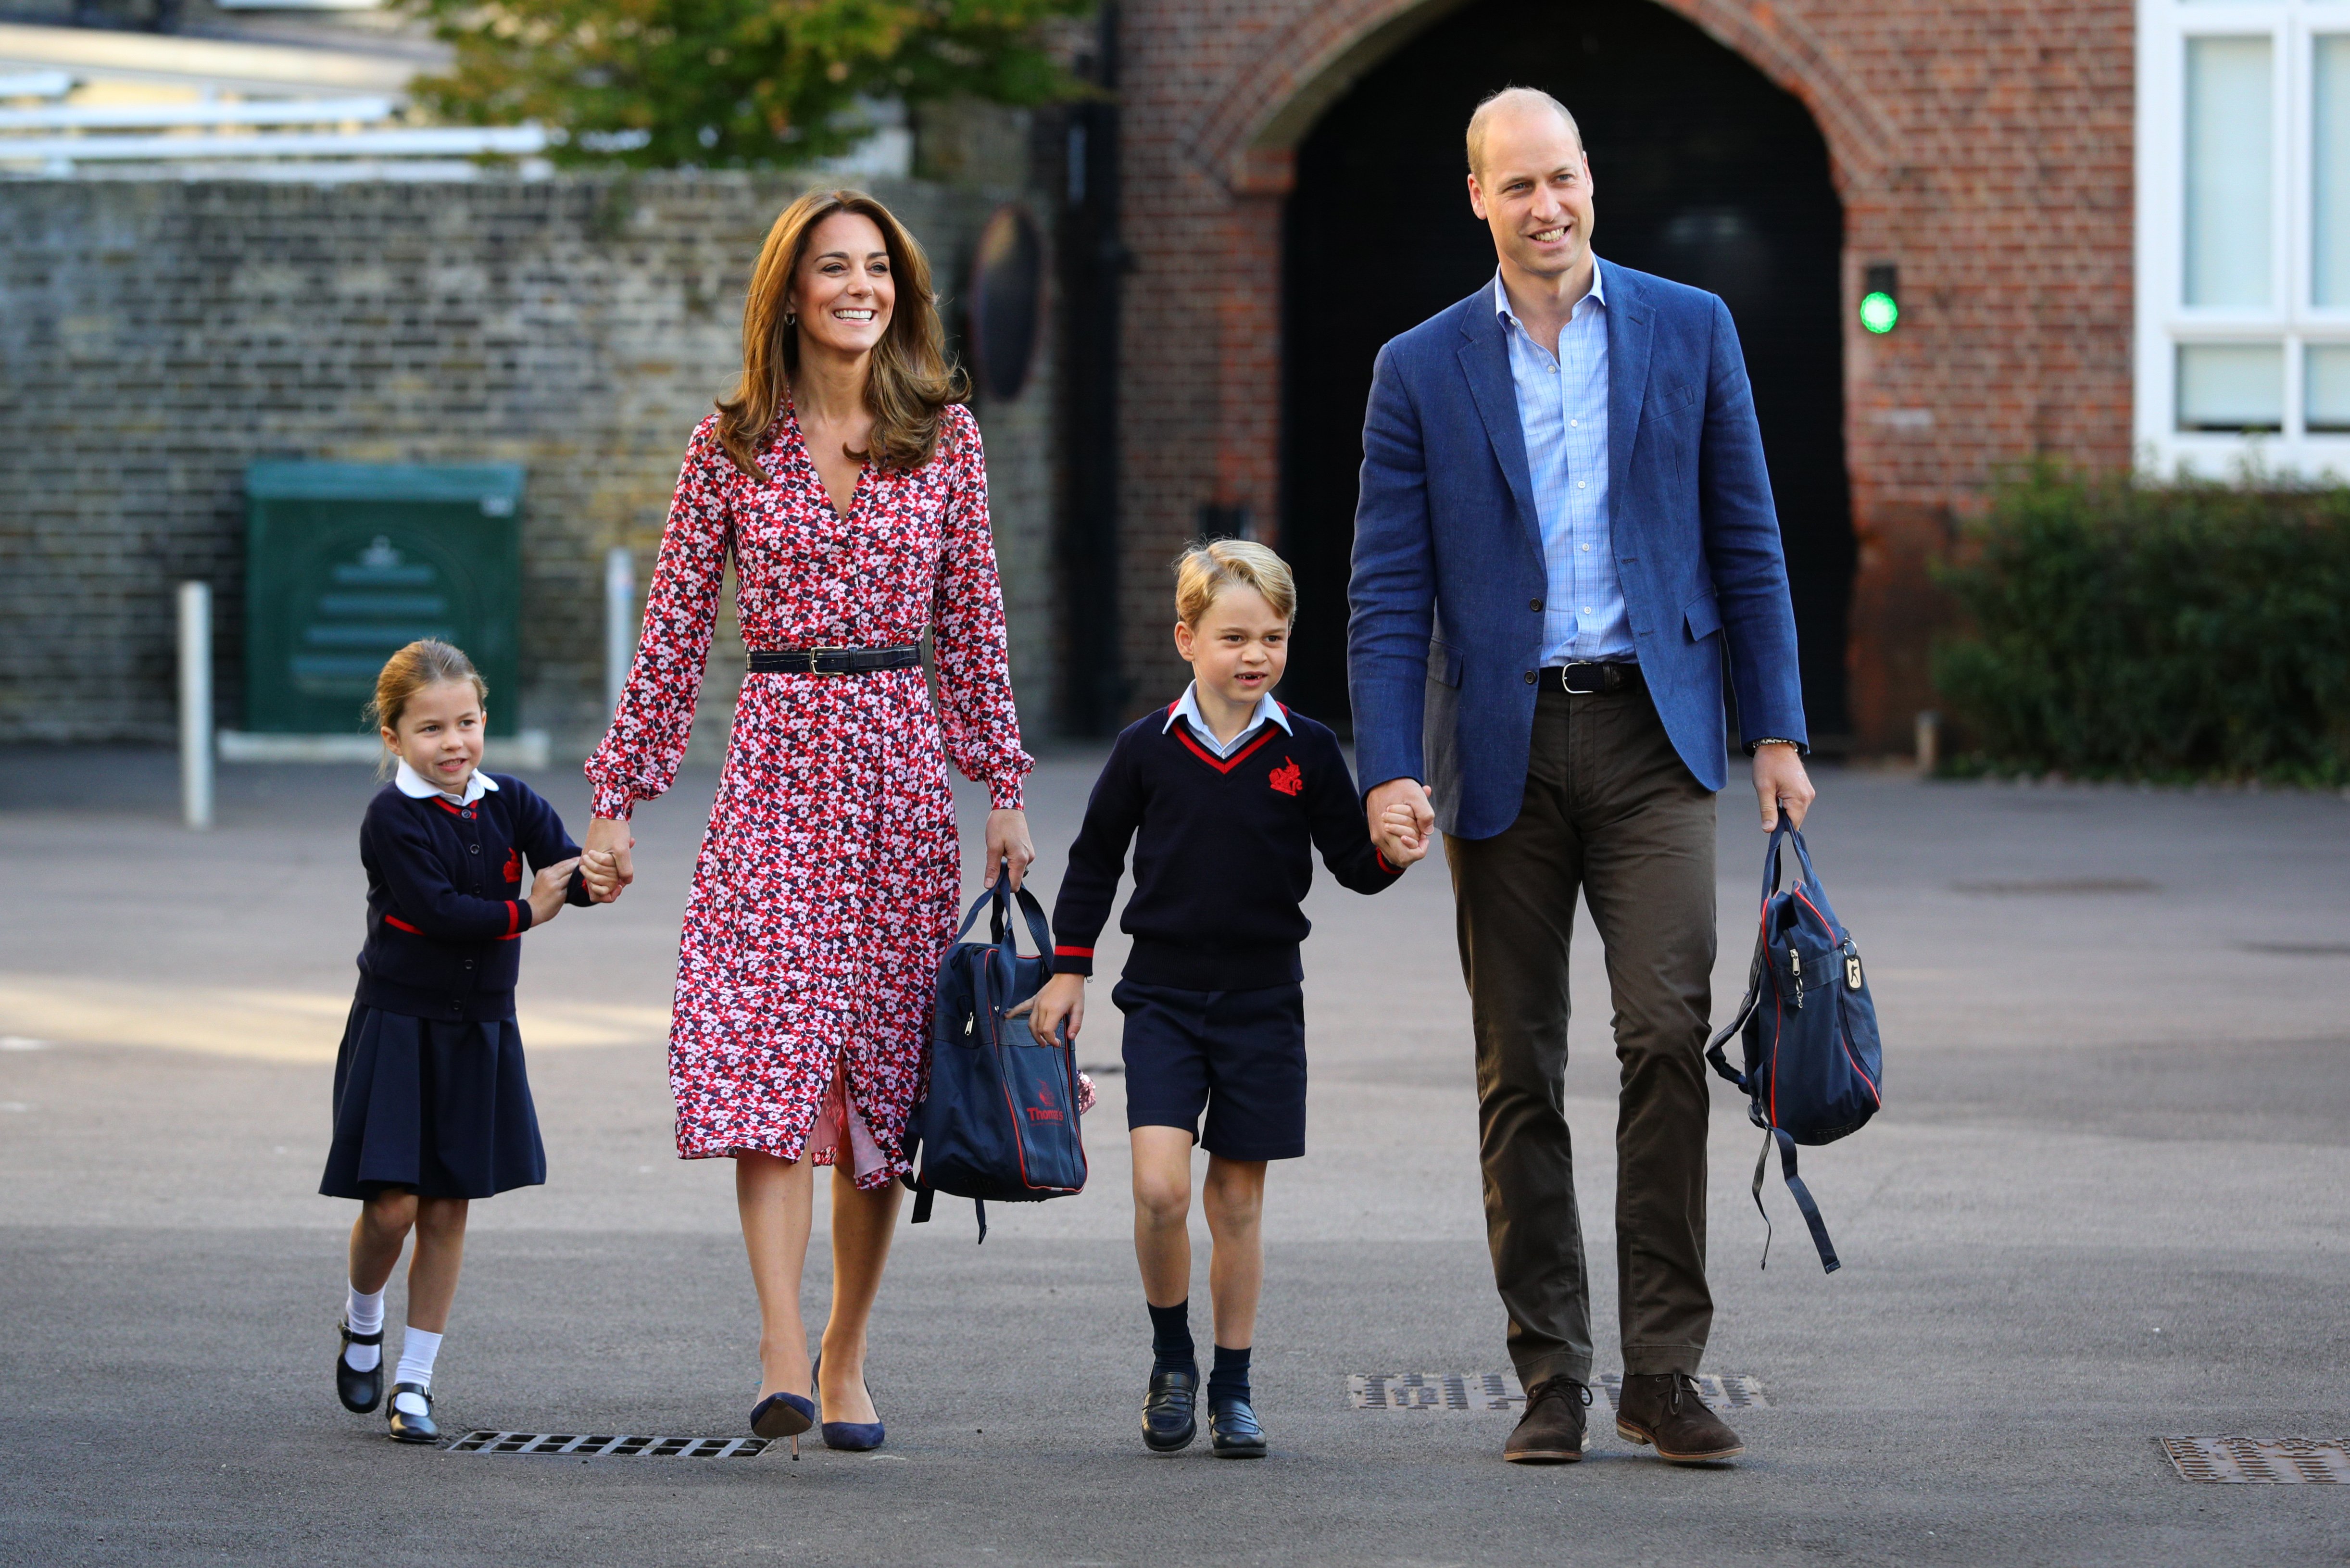 Princess Charlotte arrives for her first day of school, with her brother Prince George and their parents on September 5, 2019 in London, England | Source: Getty Images